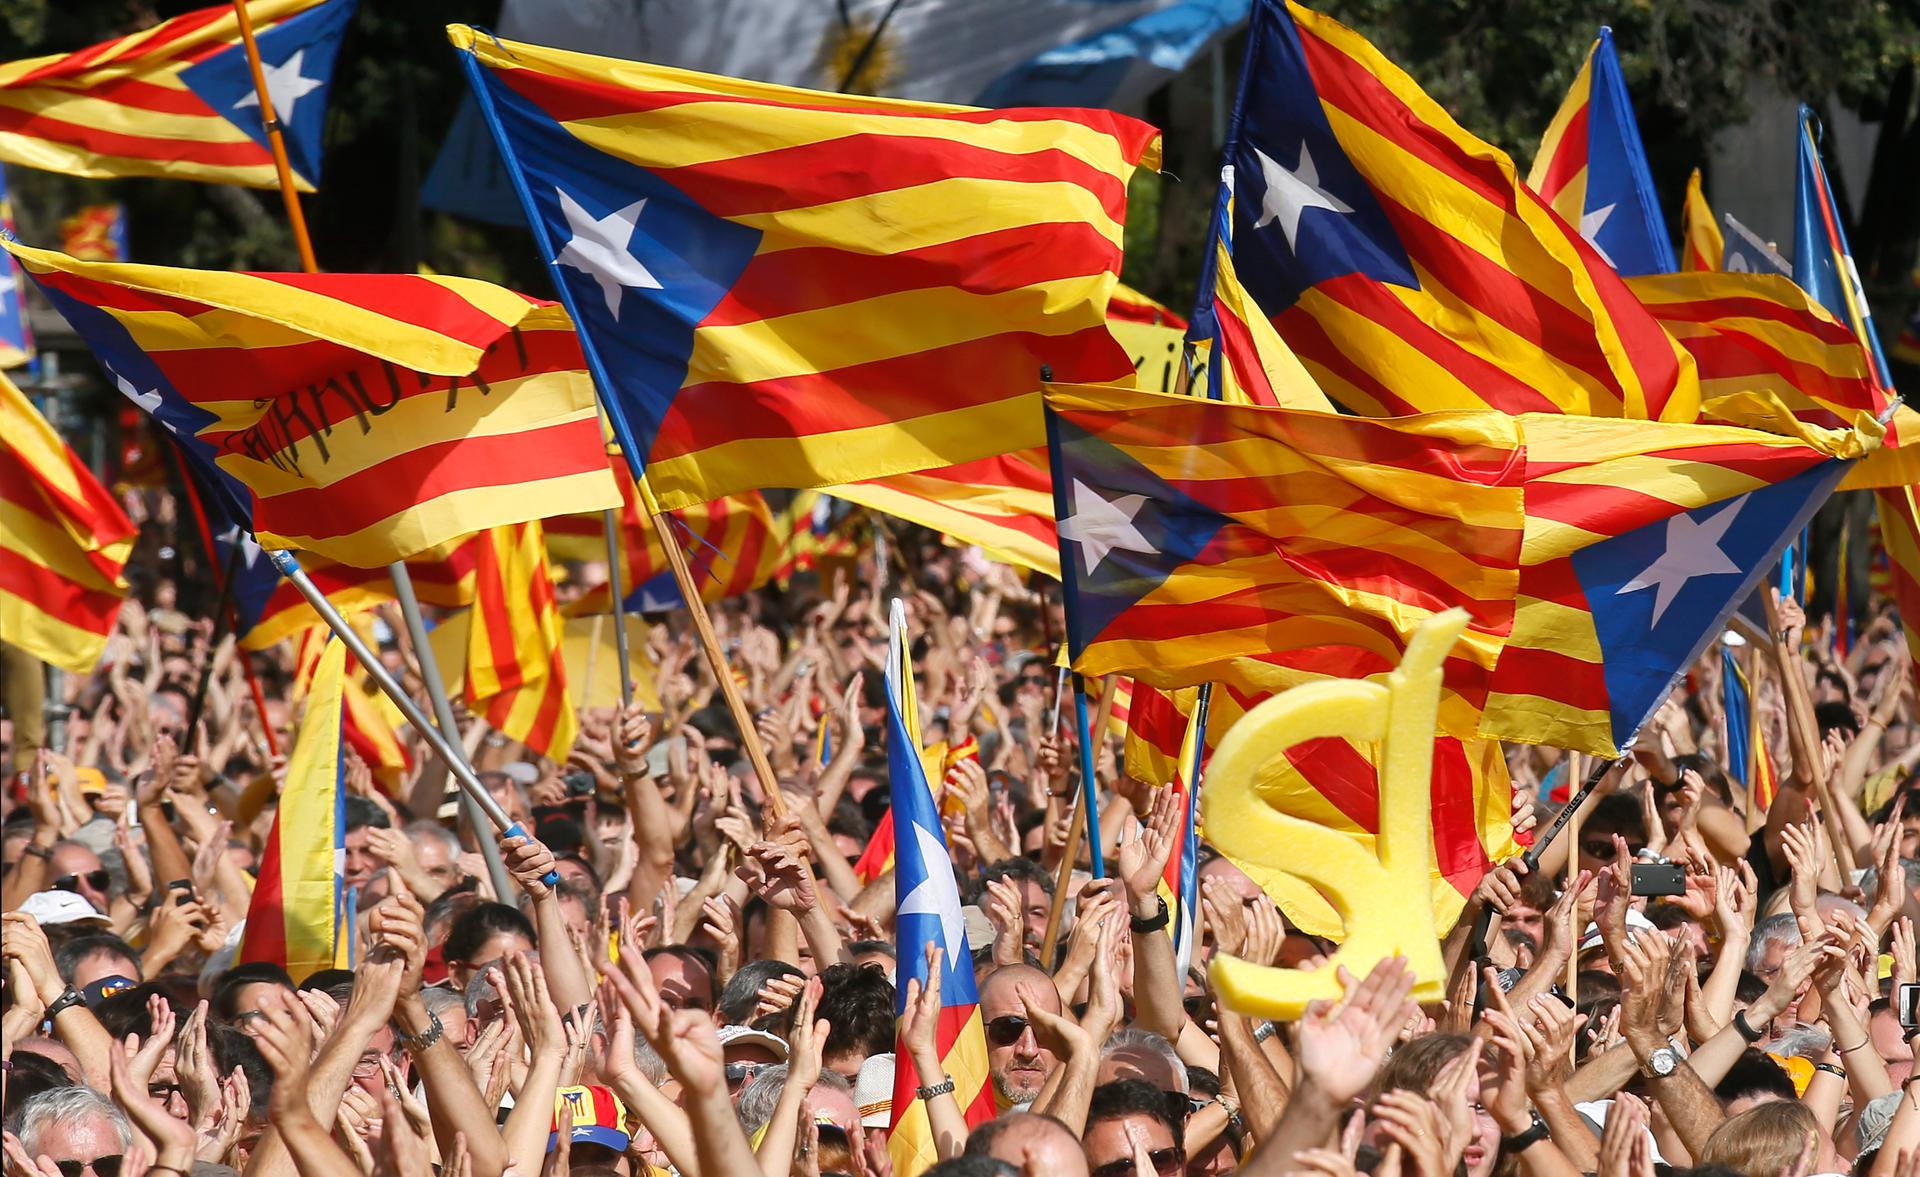 People wave Catalan separatist flags during a pro-independence demonstration at Catalunya square in Barcelona. 